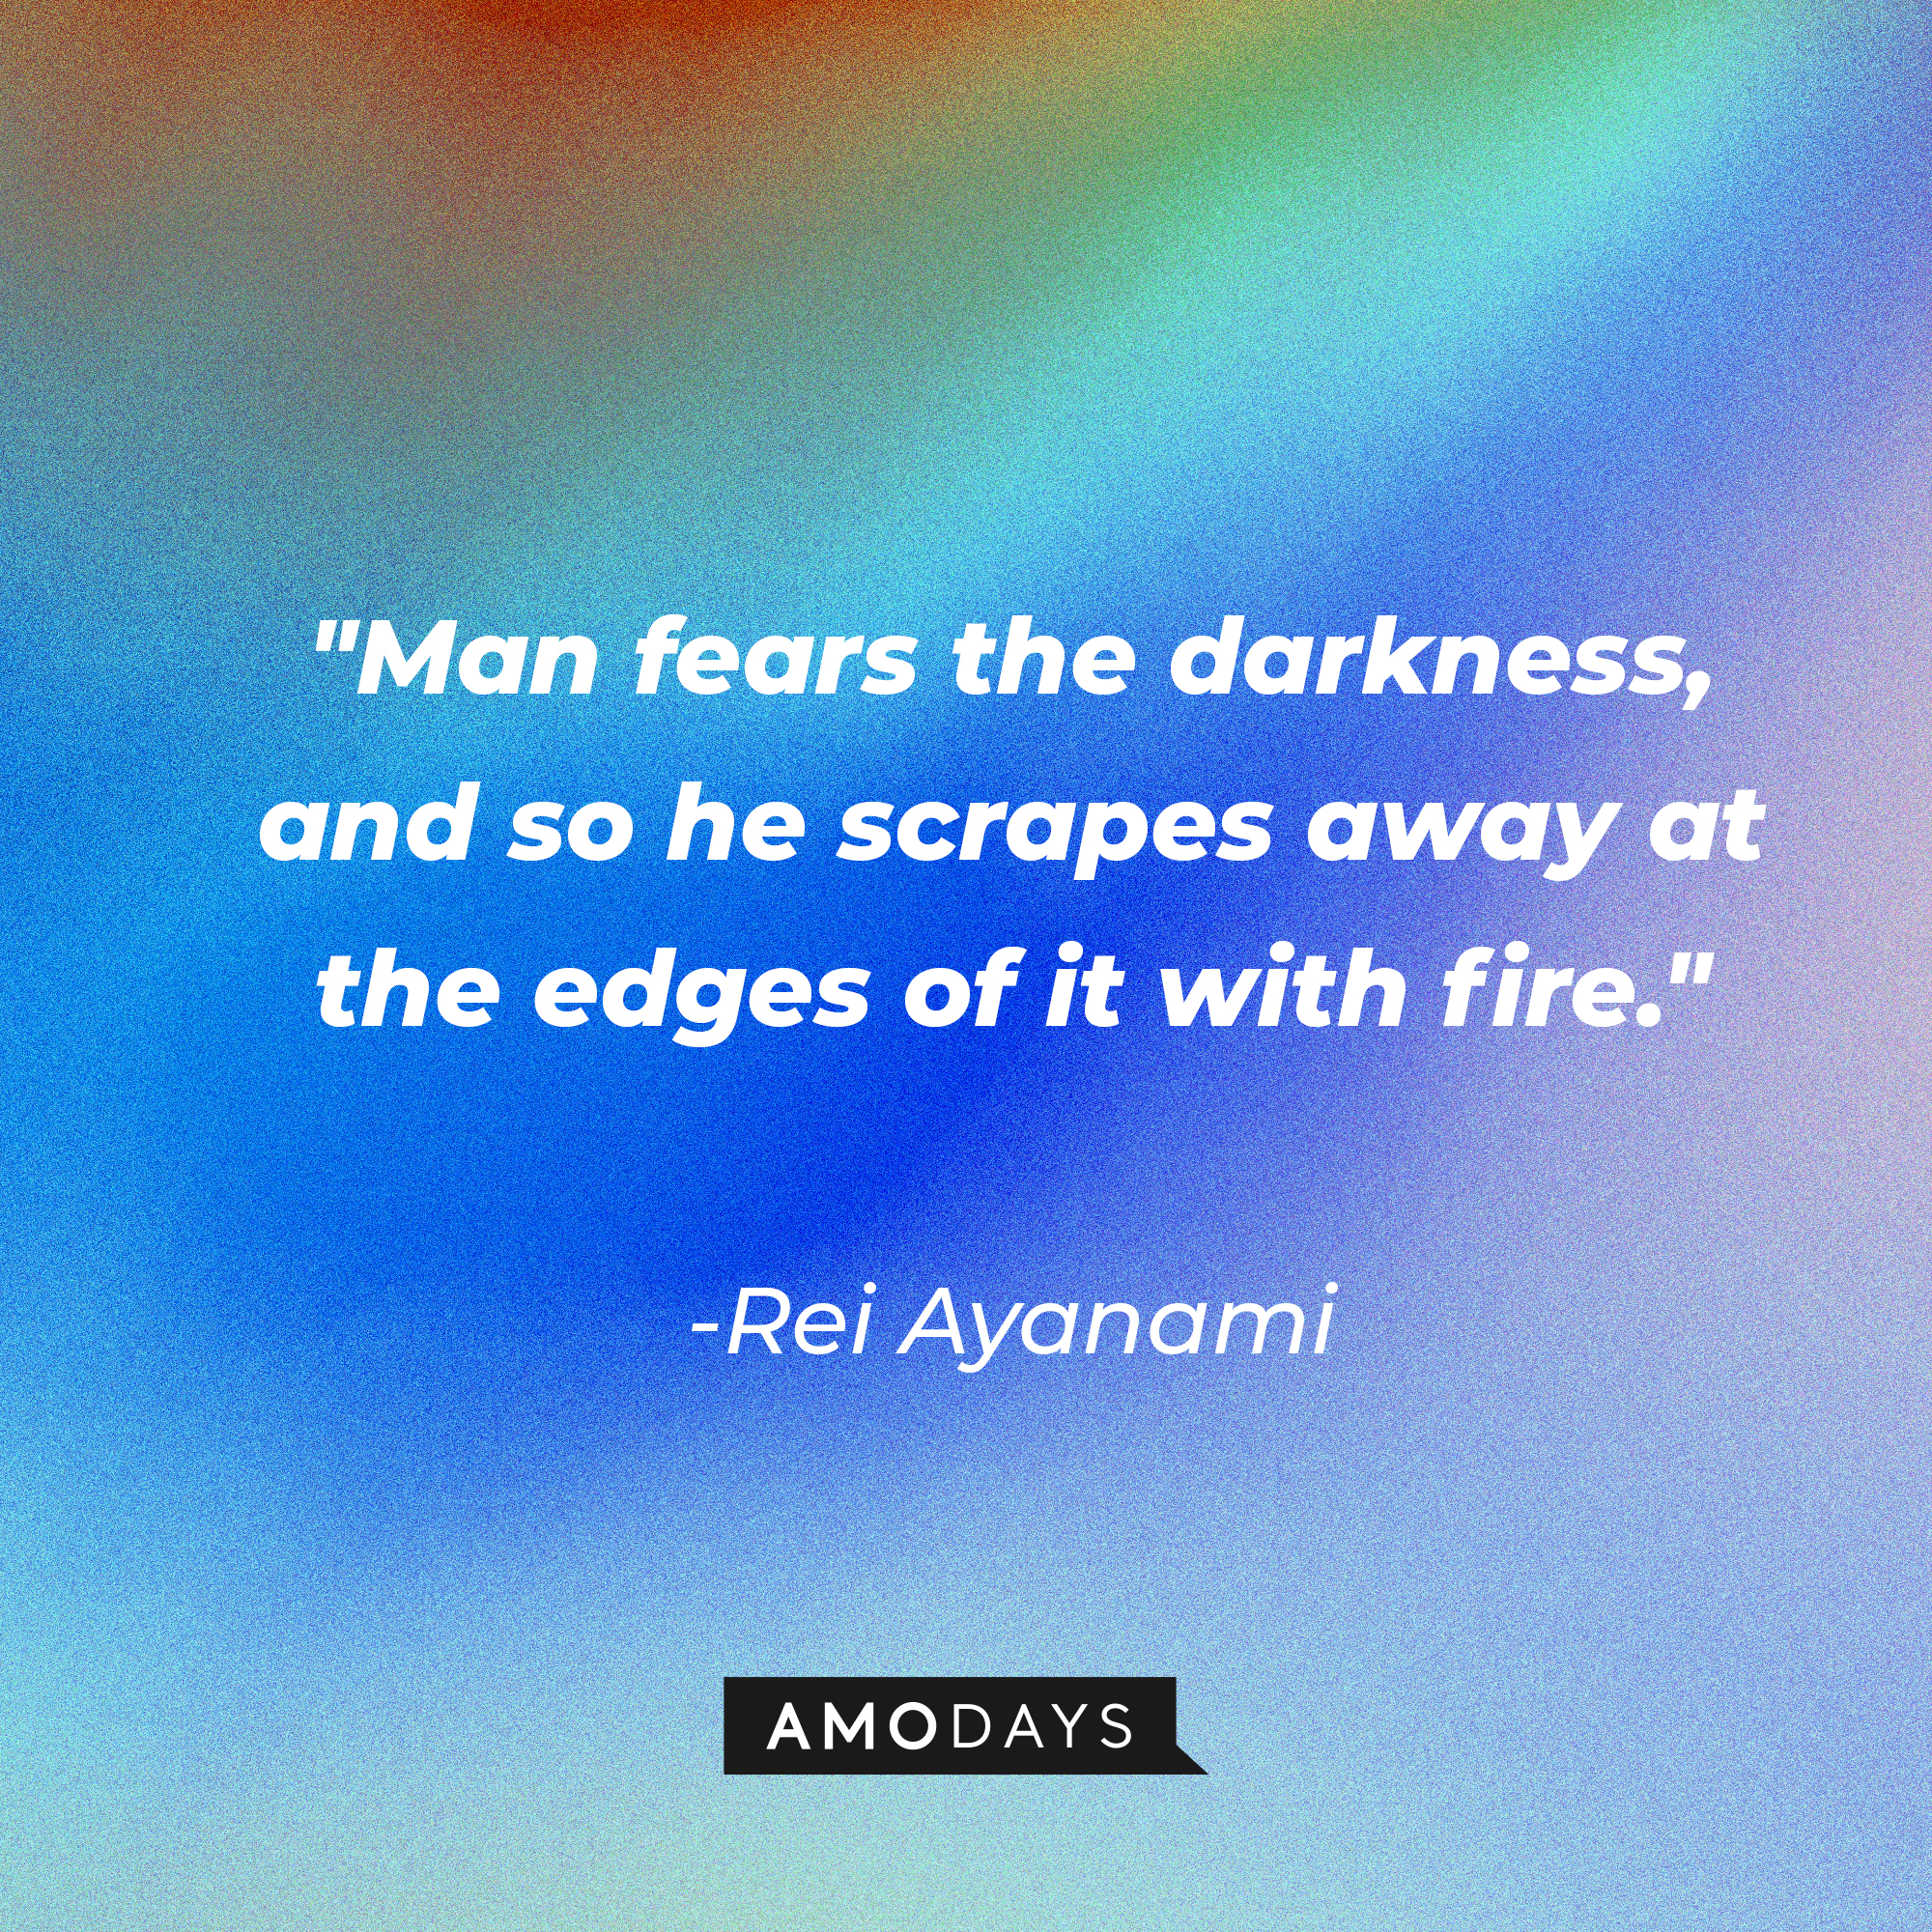 Rei Ayanami’s quote: "Man fears the darkness, and so he scrapes away at the edges of it with fire." | Source: AmoDays